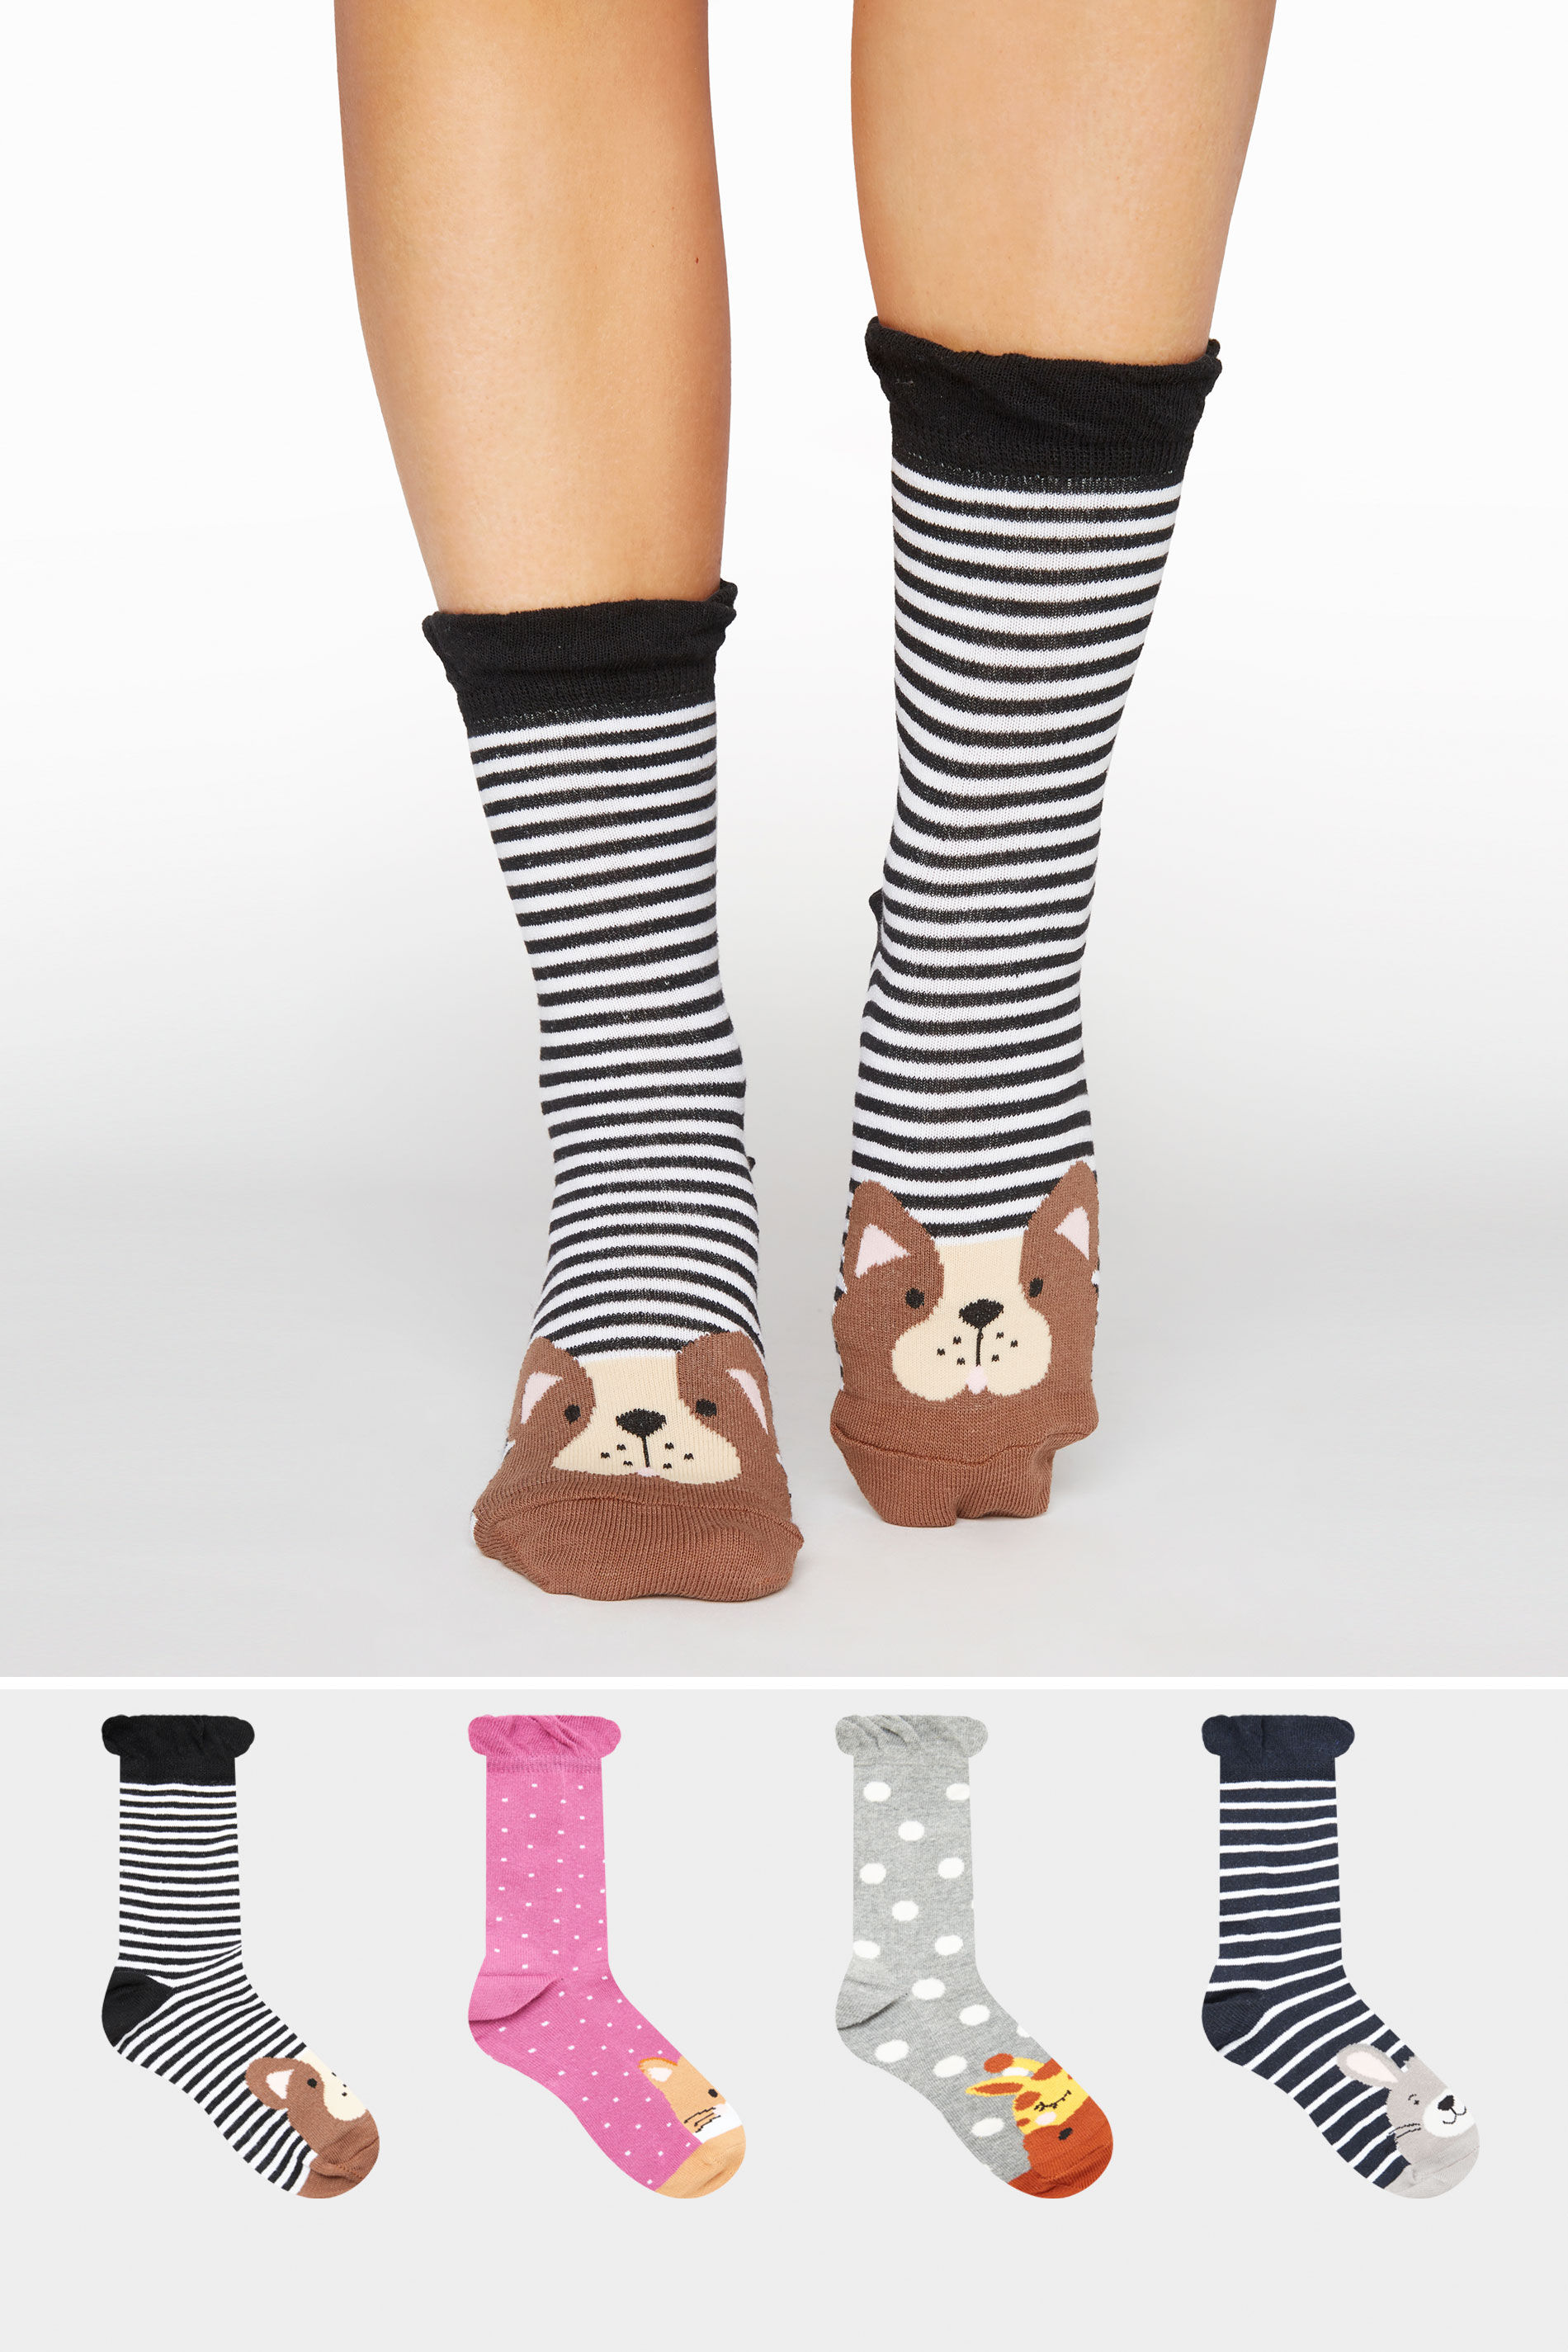 Yours Clothing 4 pack multi animal ankle socks